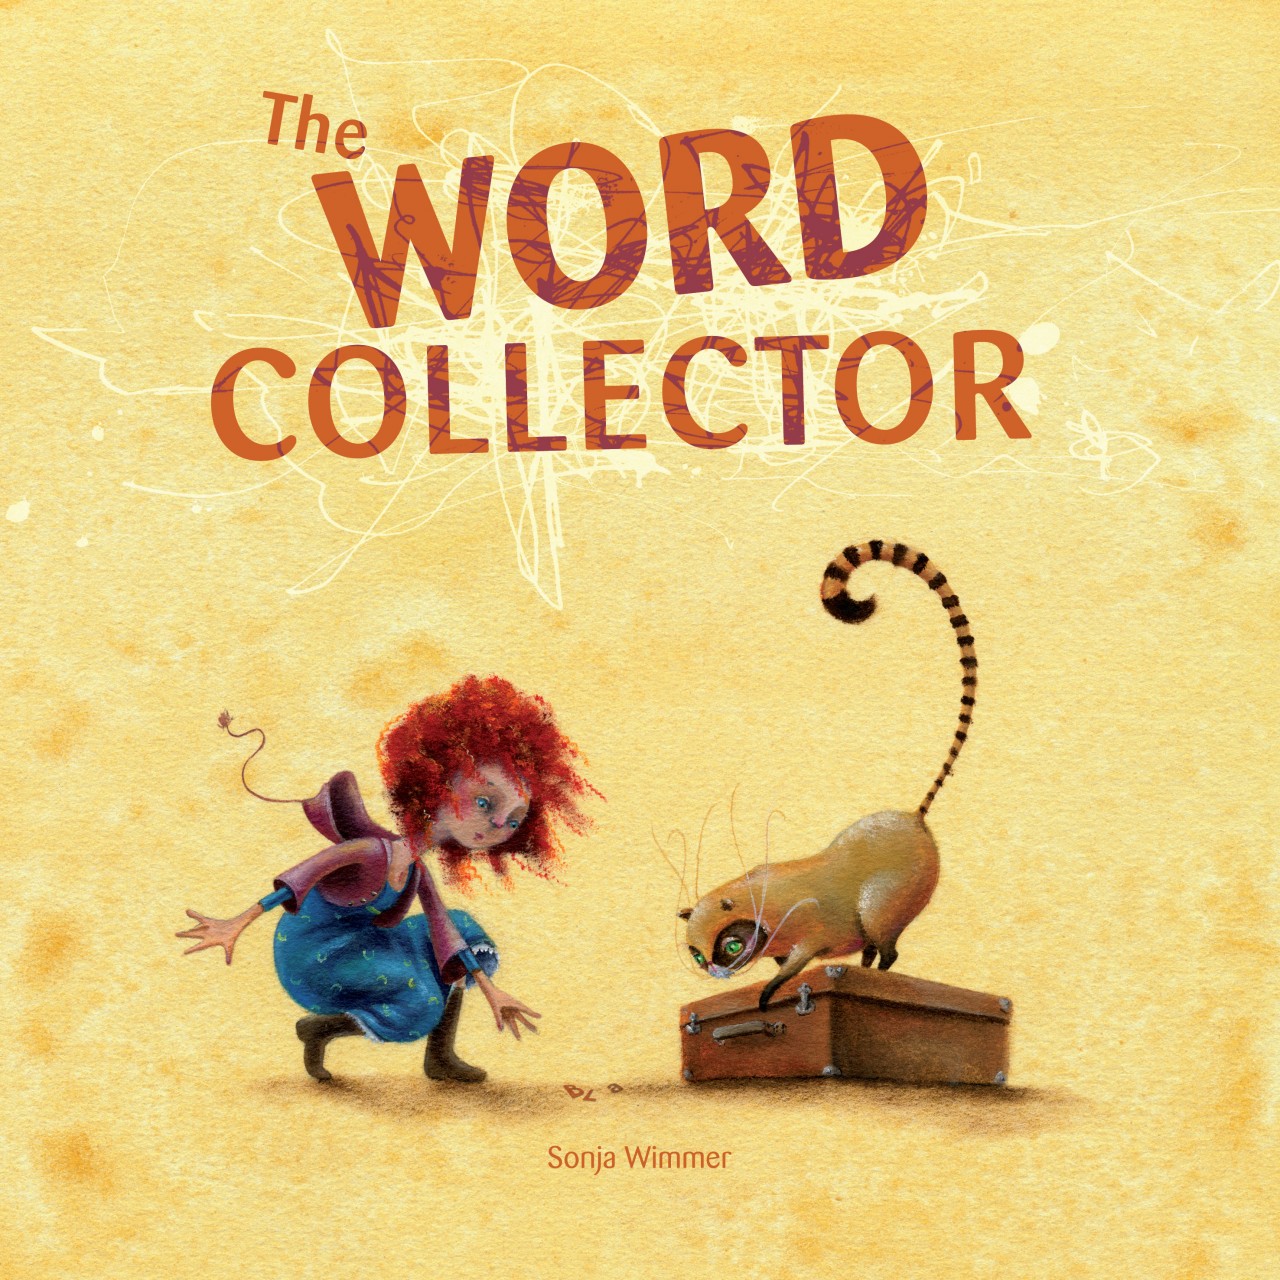 The Word Collector Sonja Wimmer